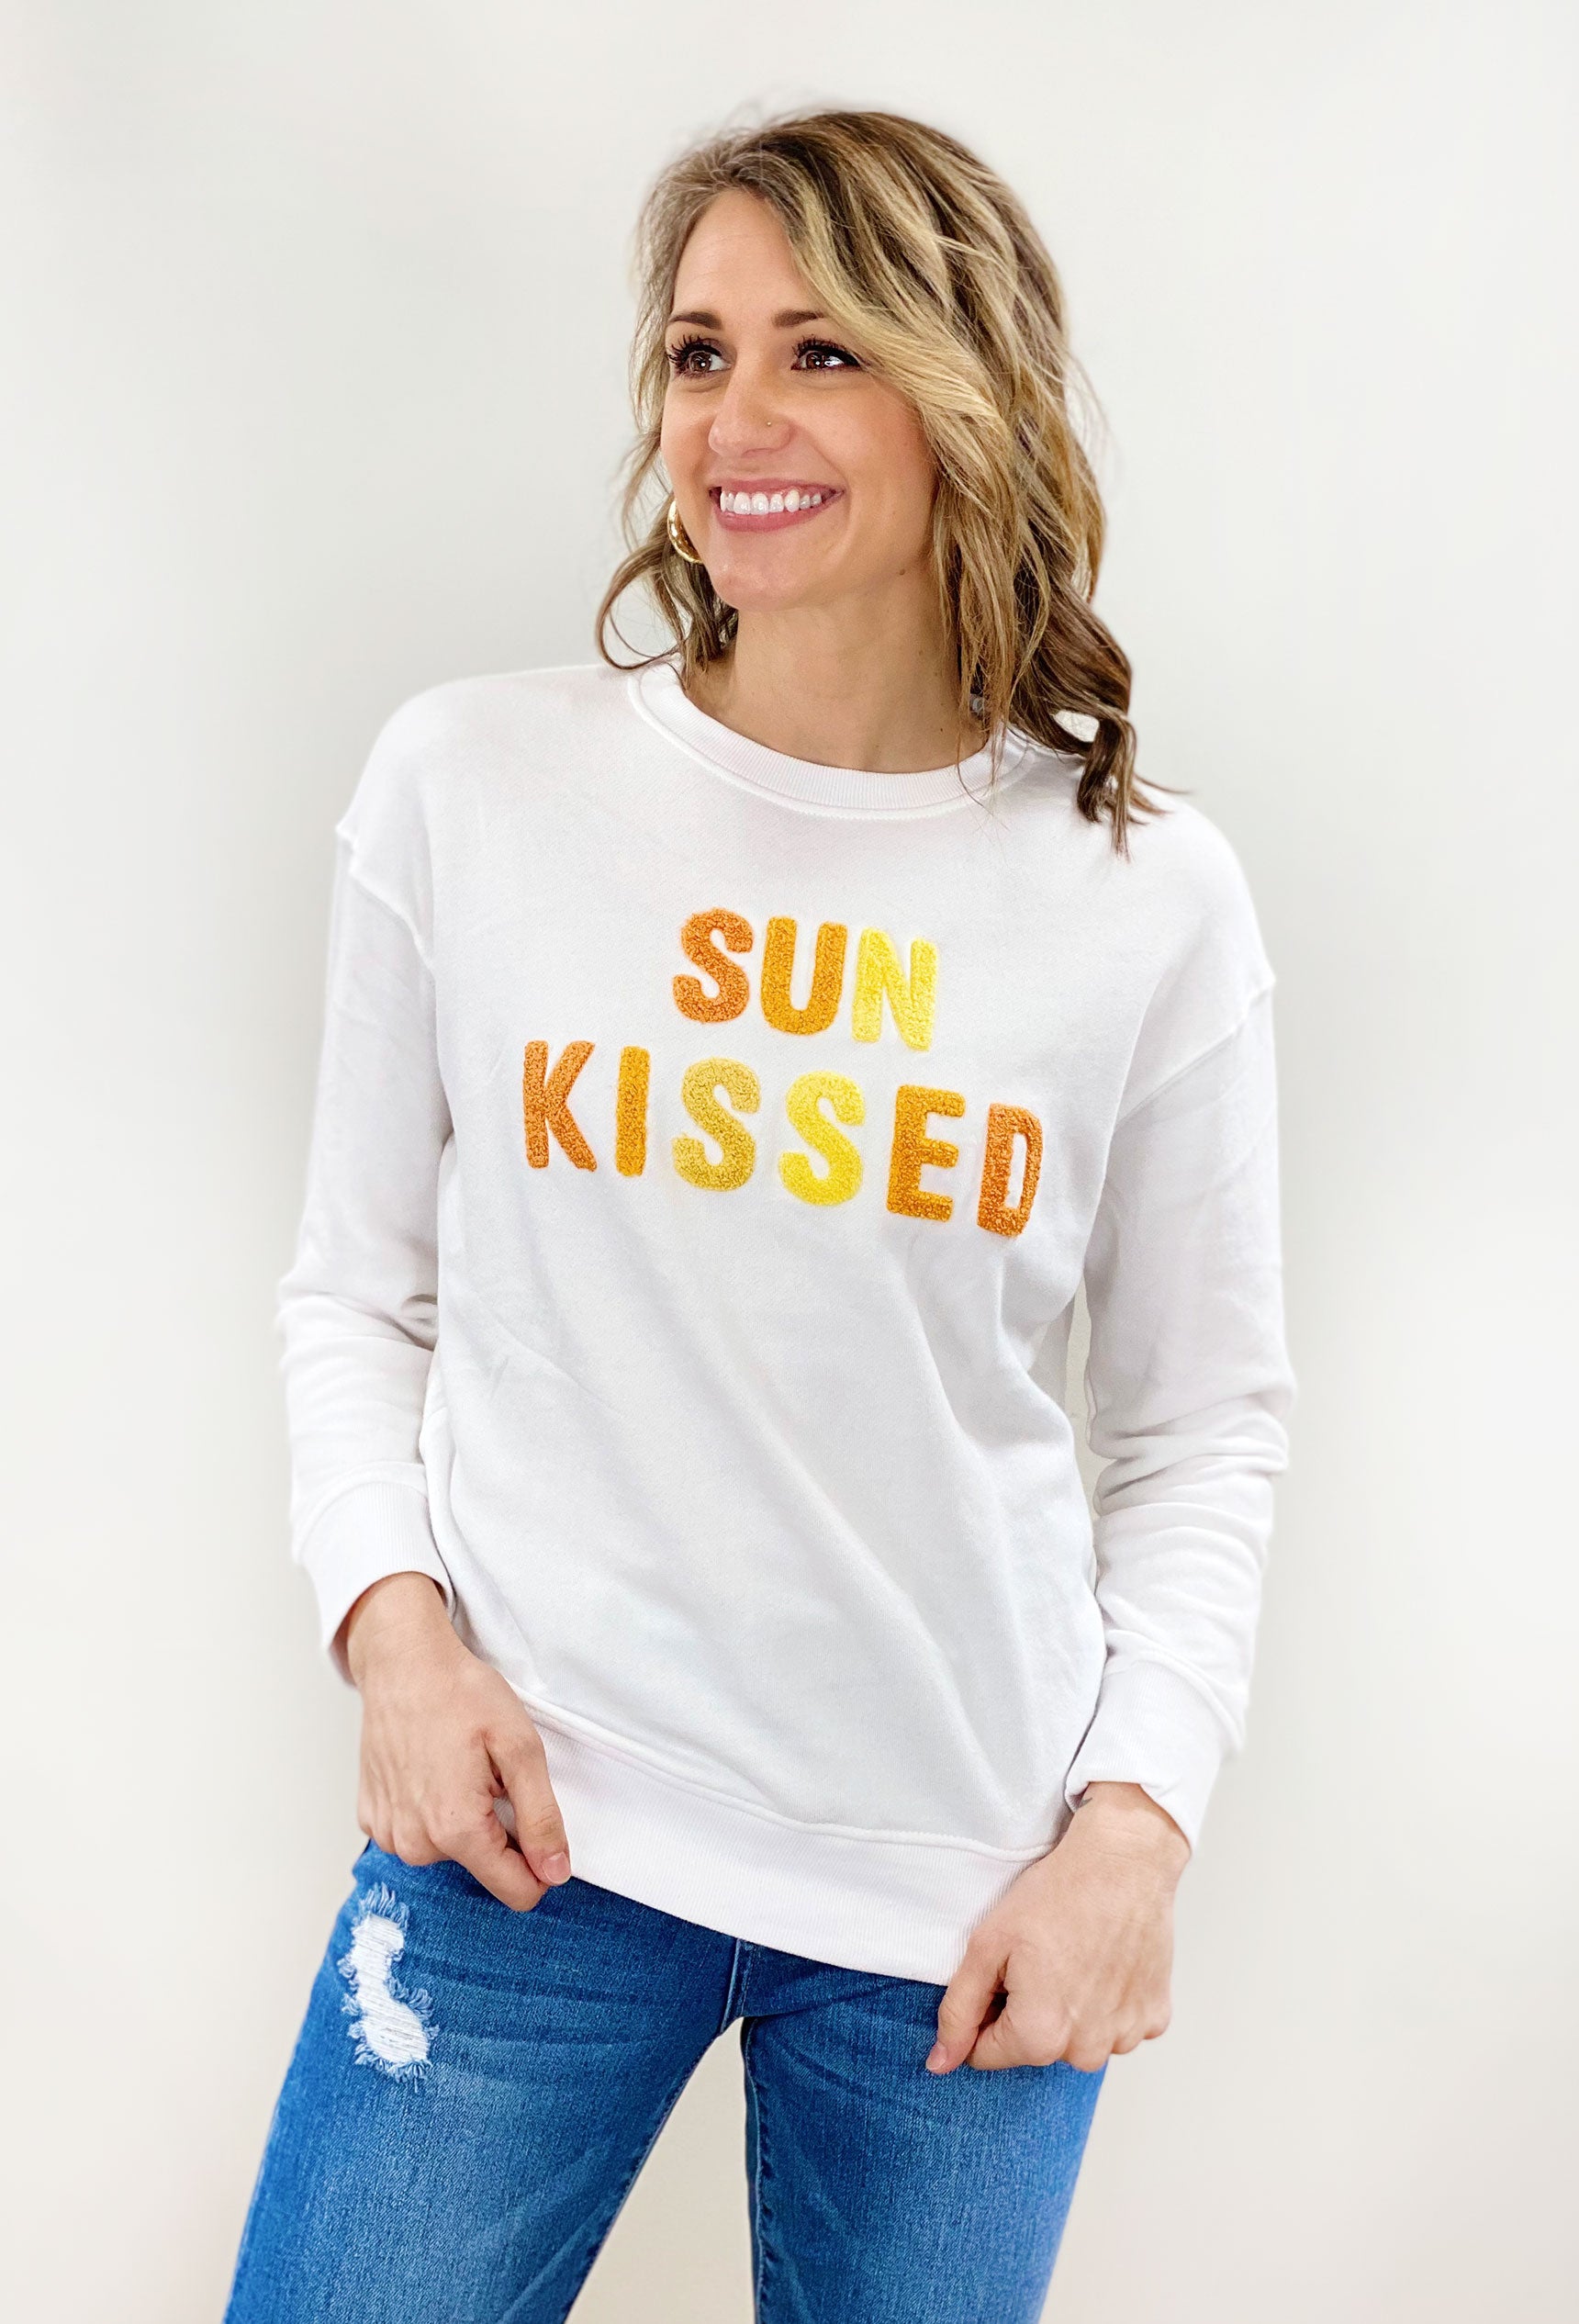 Sun Kissed Pullover, white pullover with "sun kissed" patches in different shades of yellow and orange across the chest